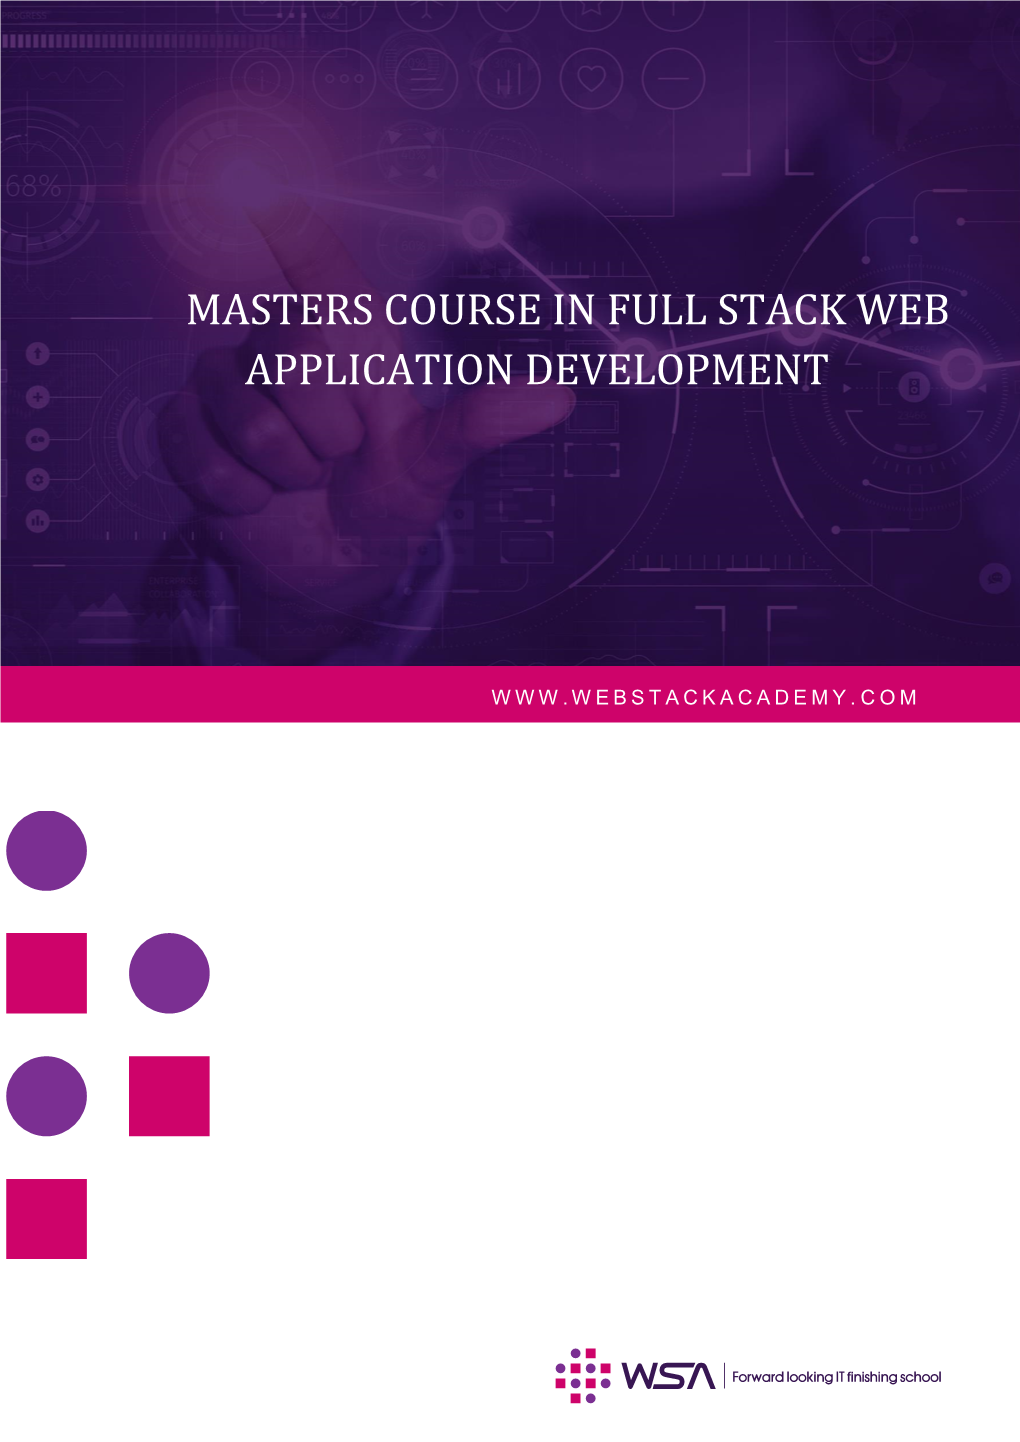 Masters Course in Full Stack Web Application Development Course Syllabus